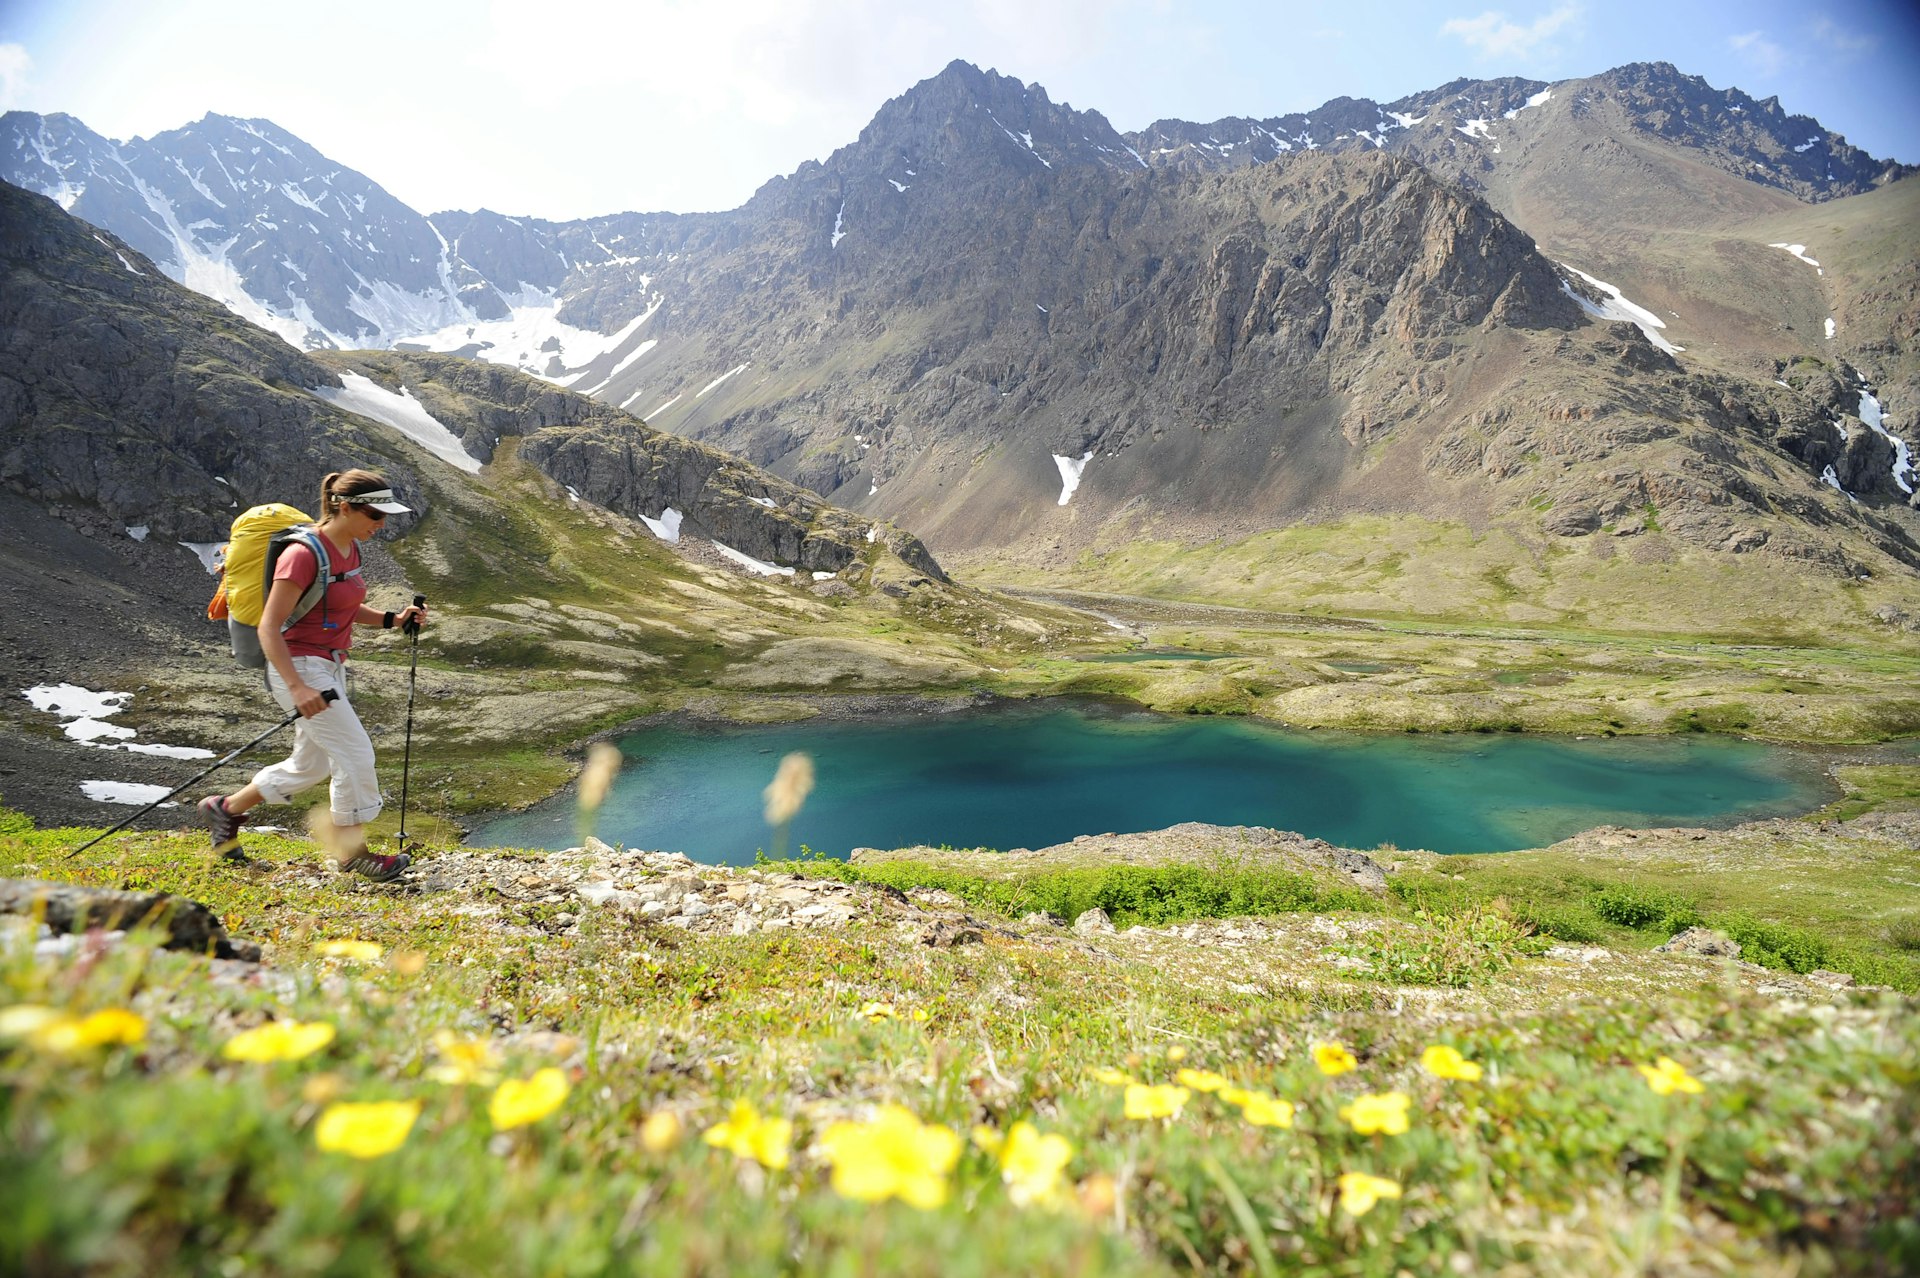 A woman hikes through a spring landscape with melting snow on the mountain behind her